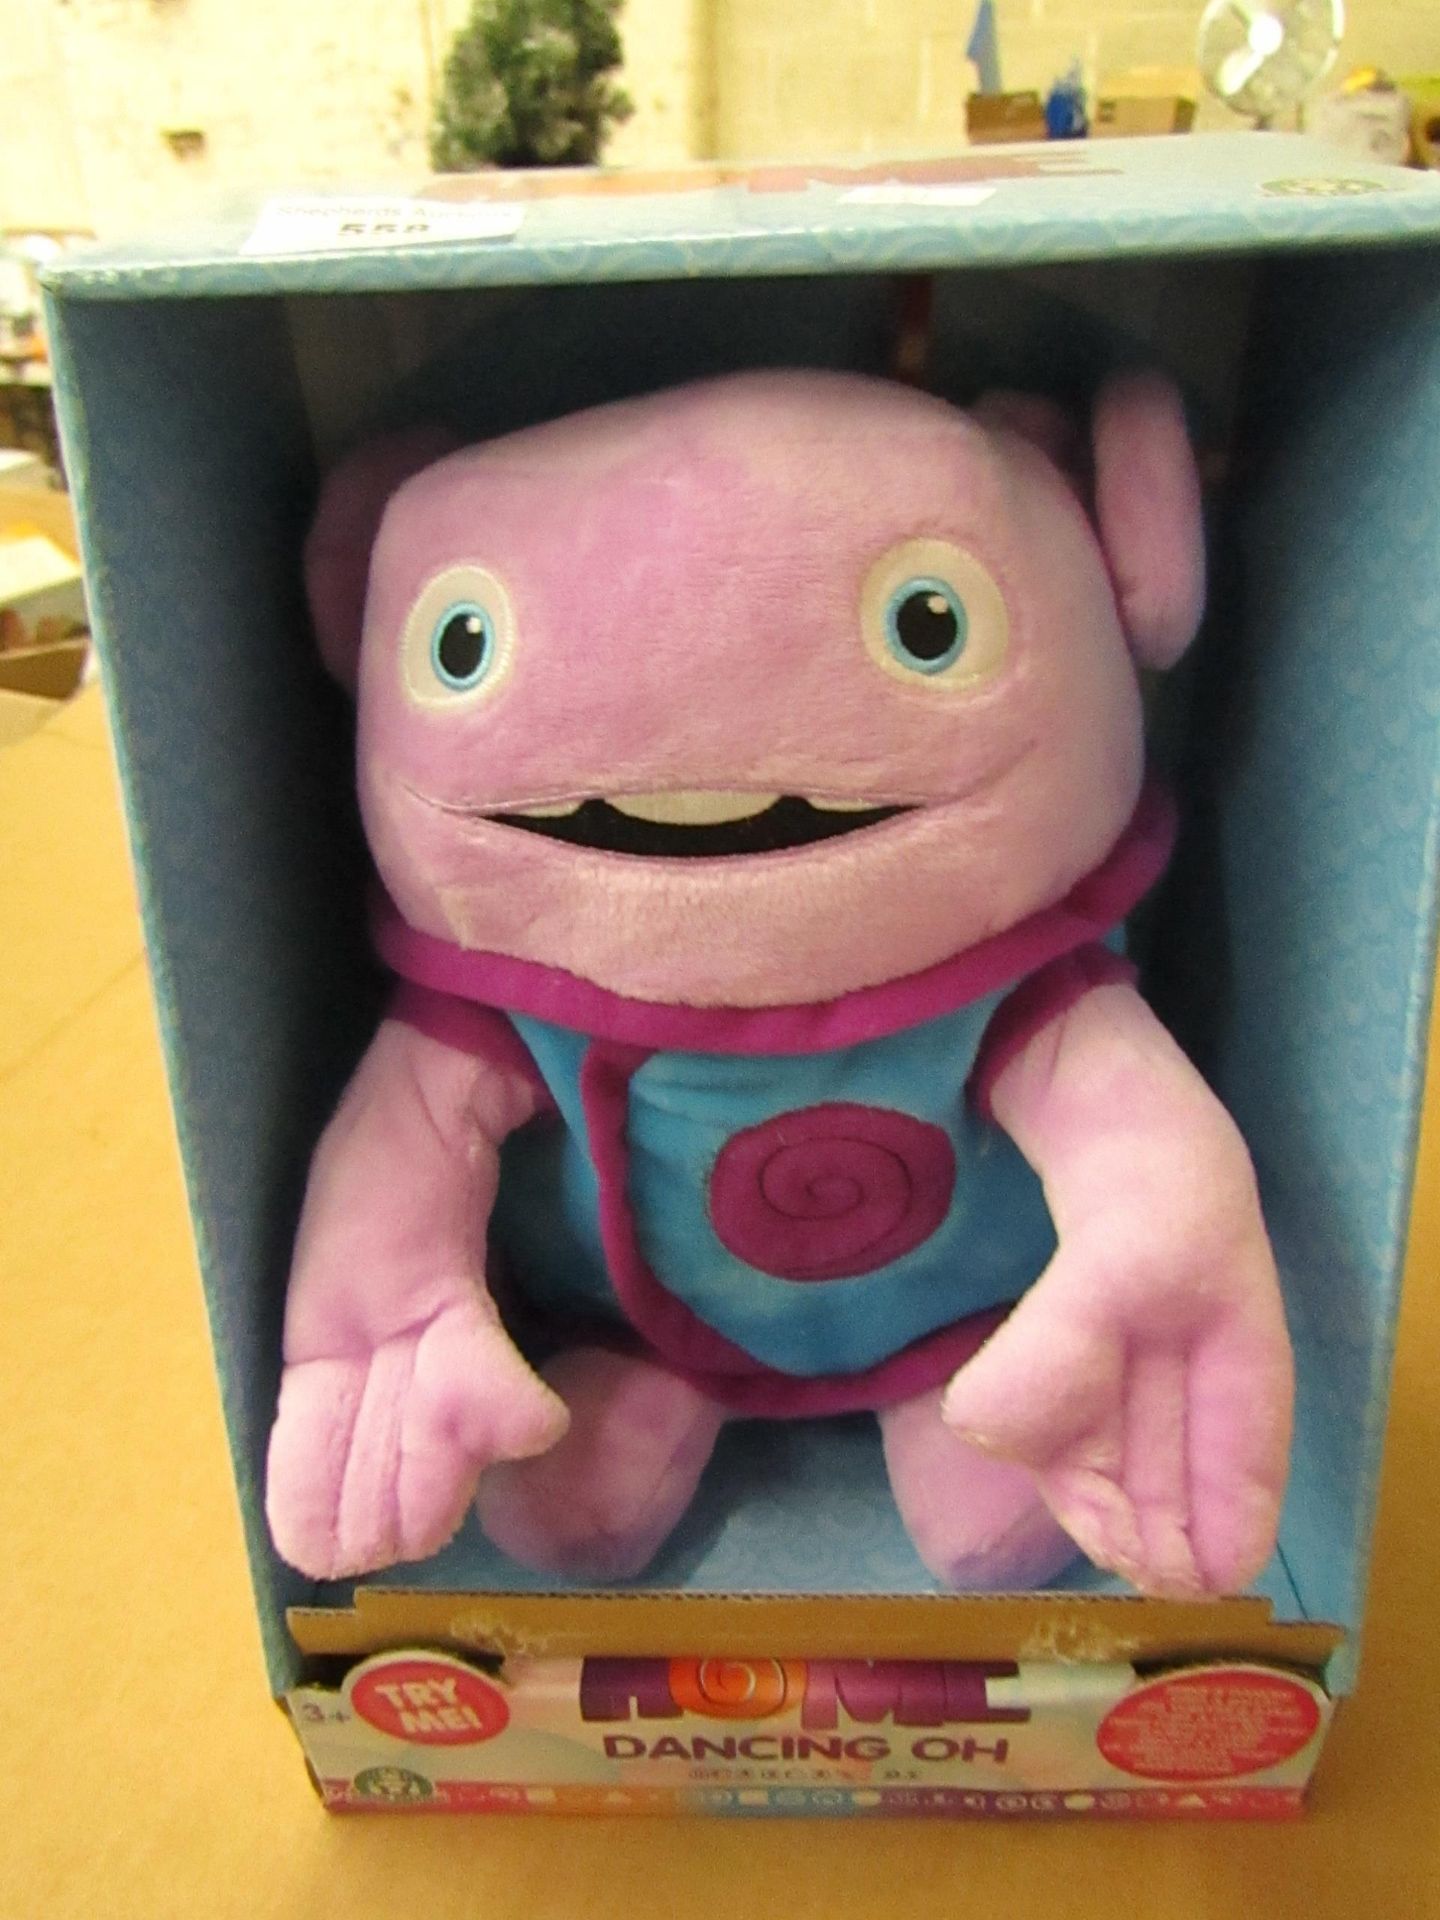 DreamWorks - HOME Dancing Oh Talking Teddy - Boxed.